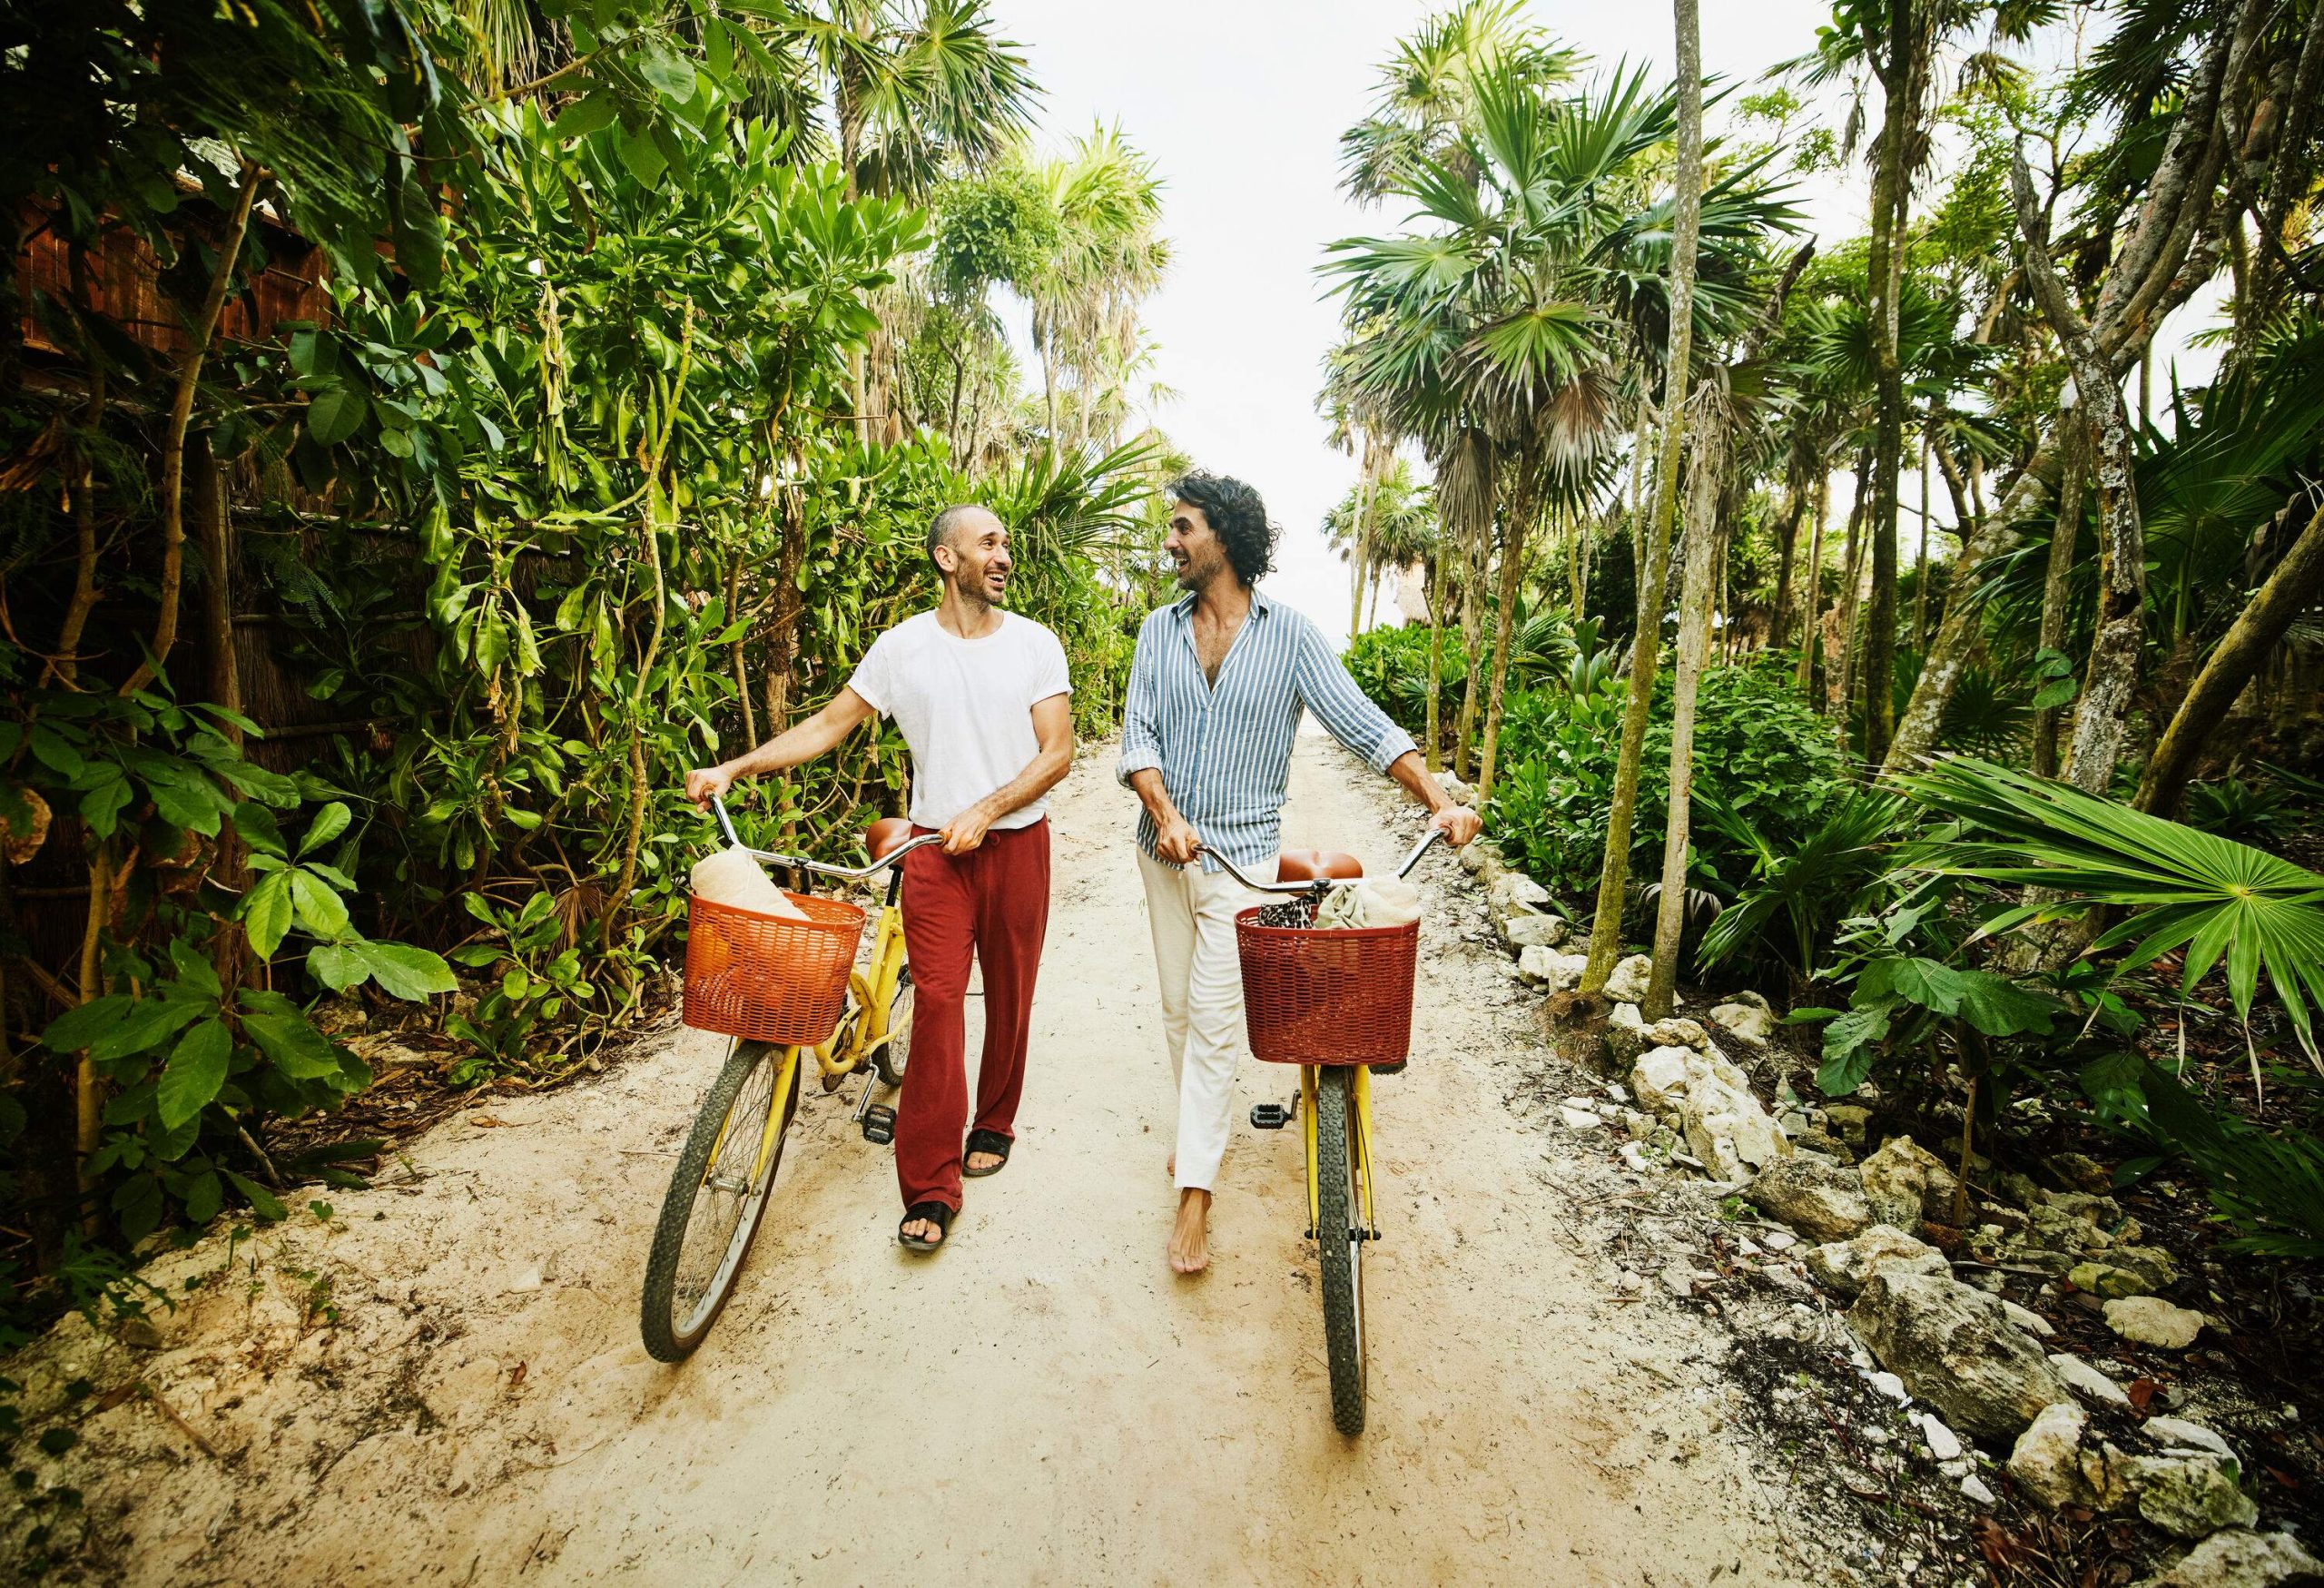 A laughing gay couple walking their bikes on a path surrounded by lush vegetation.